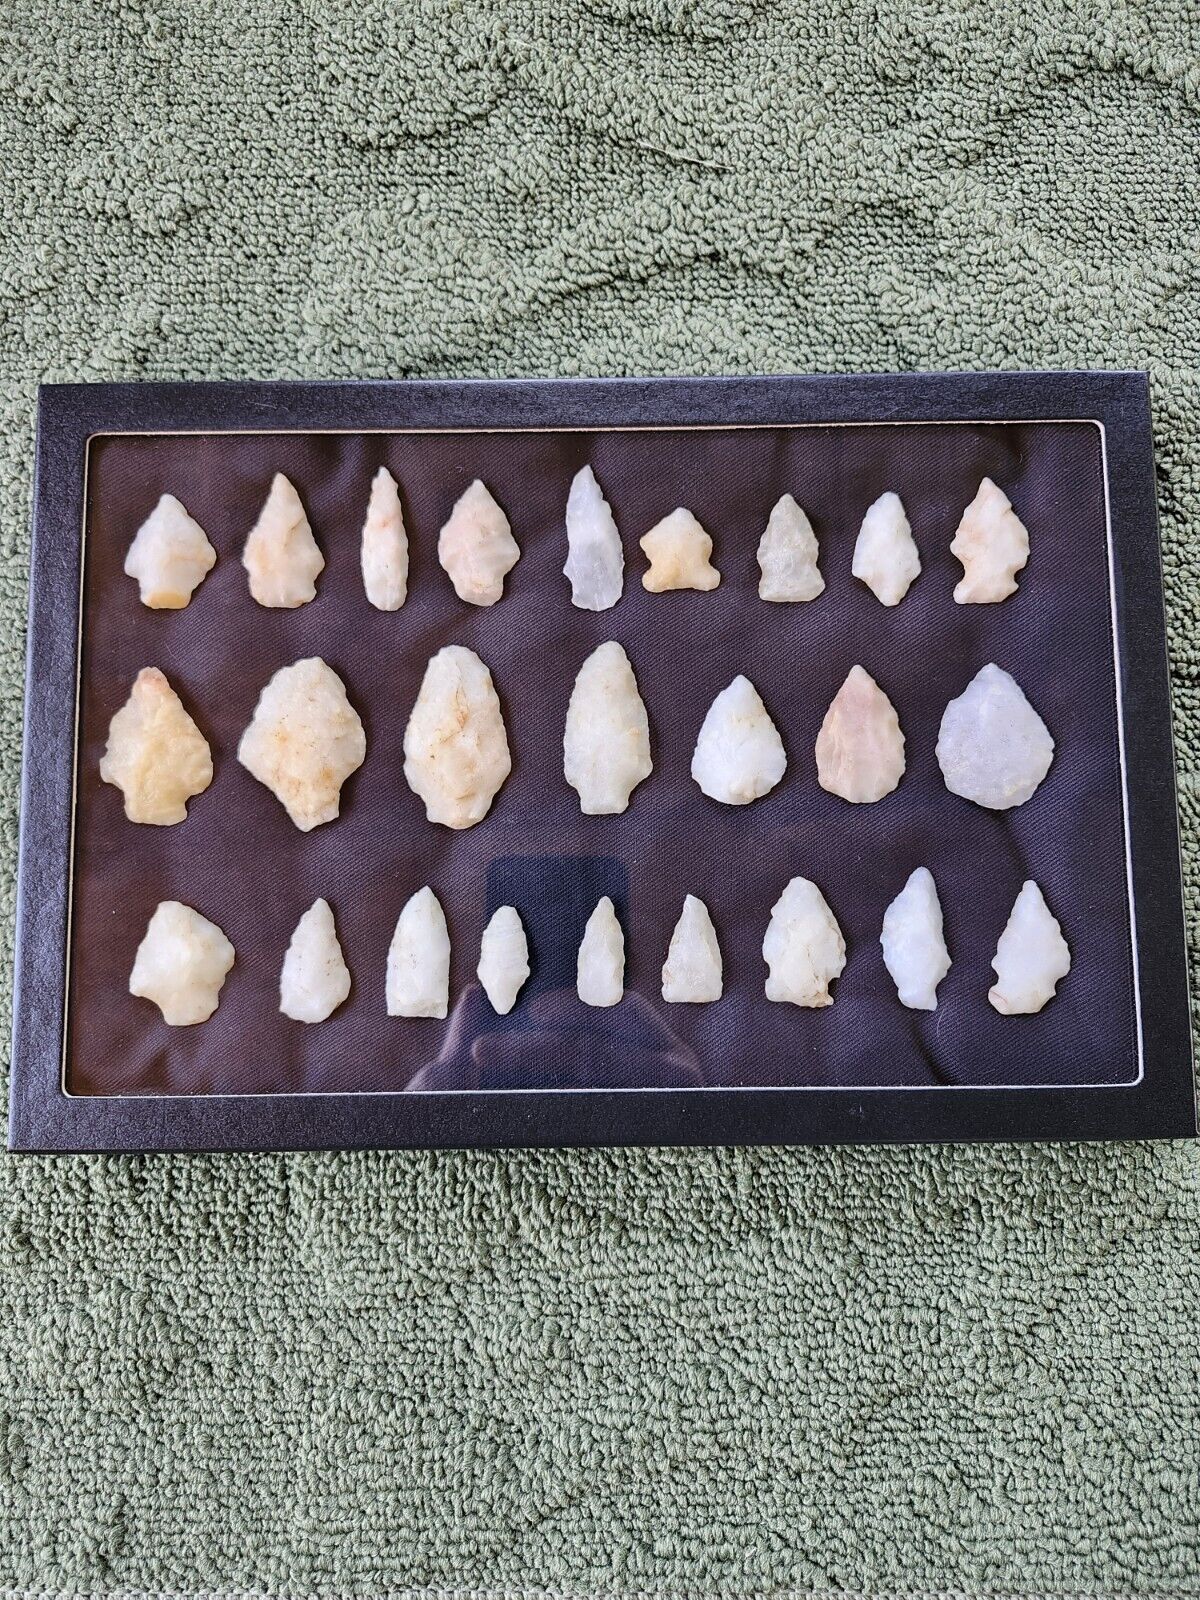 Authentic Arrowheads Ohio River Native American Artifacts Lot Group